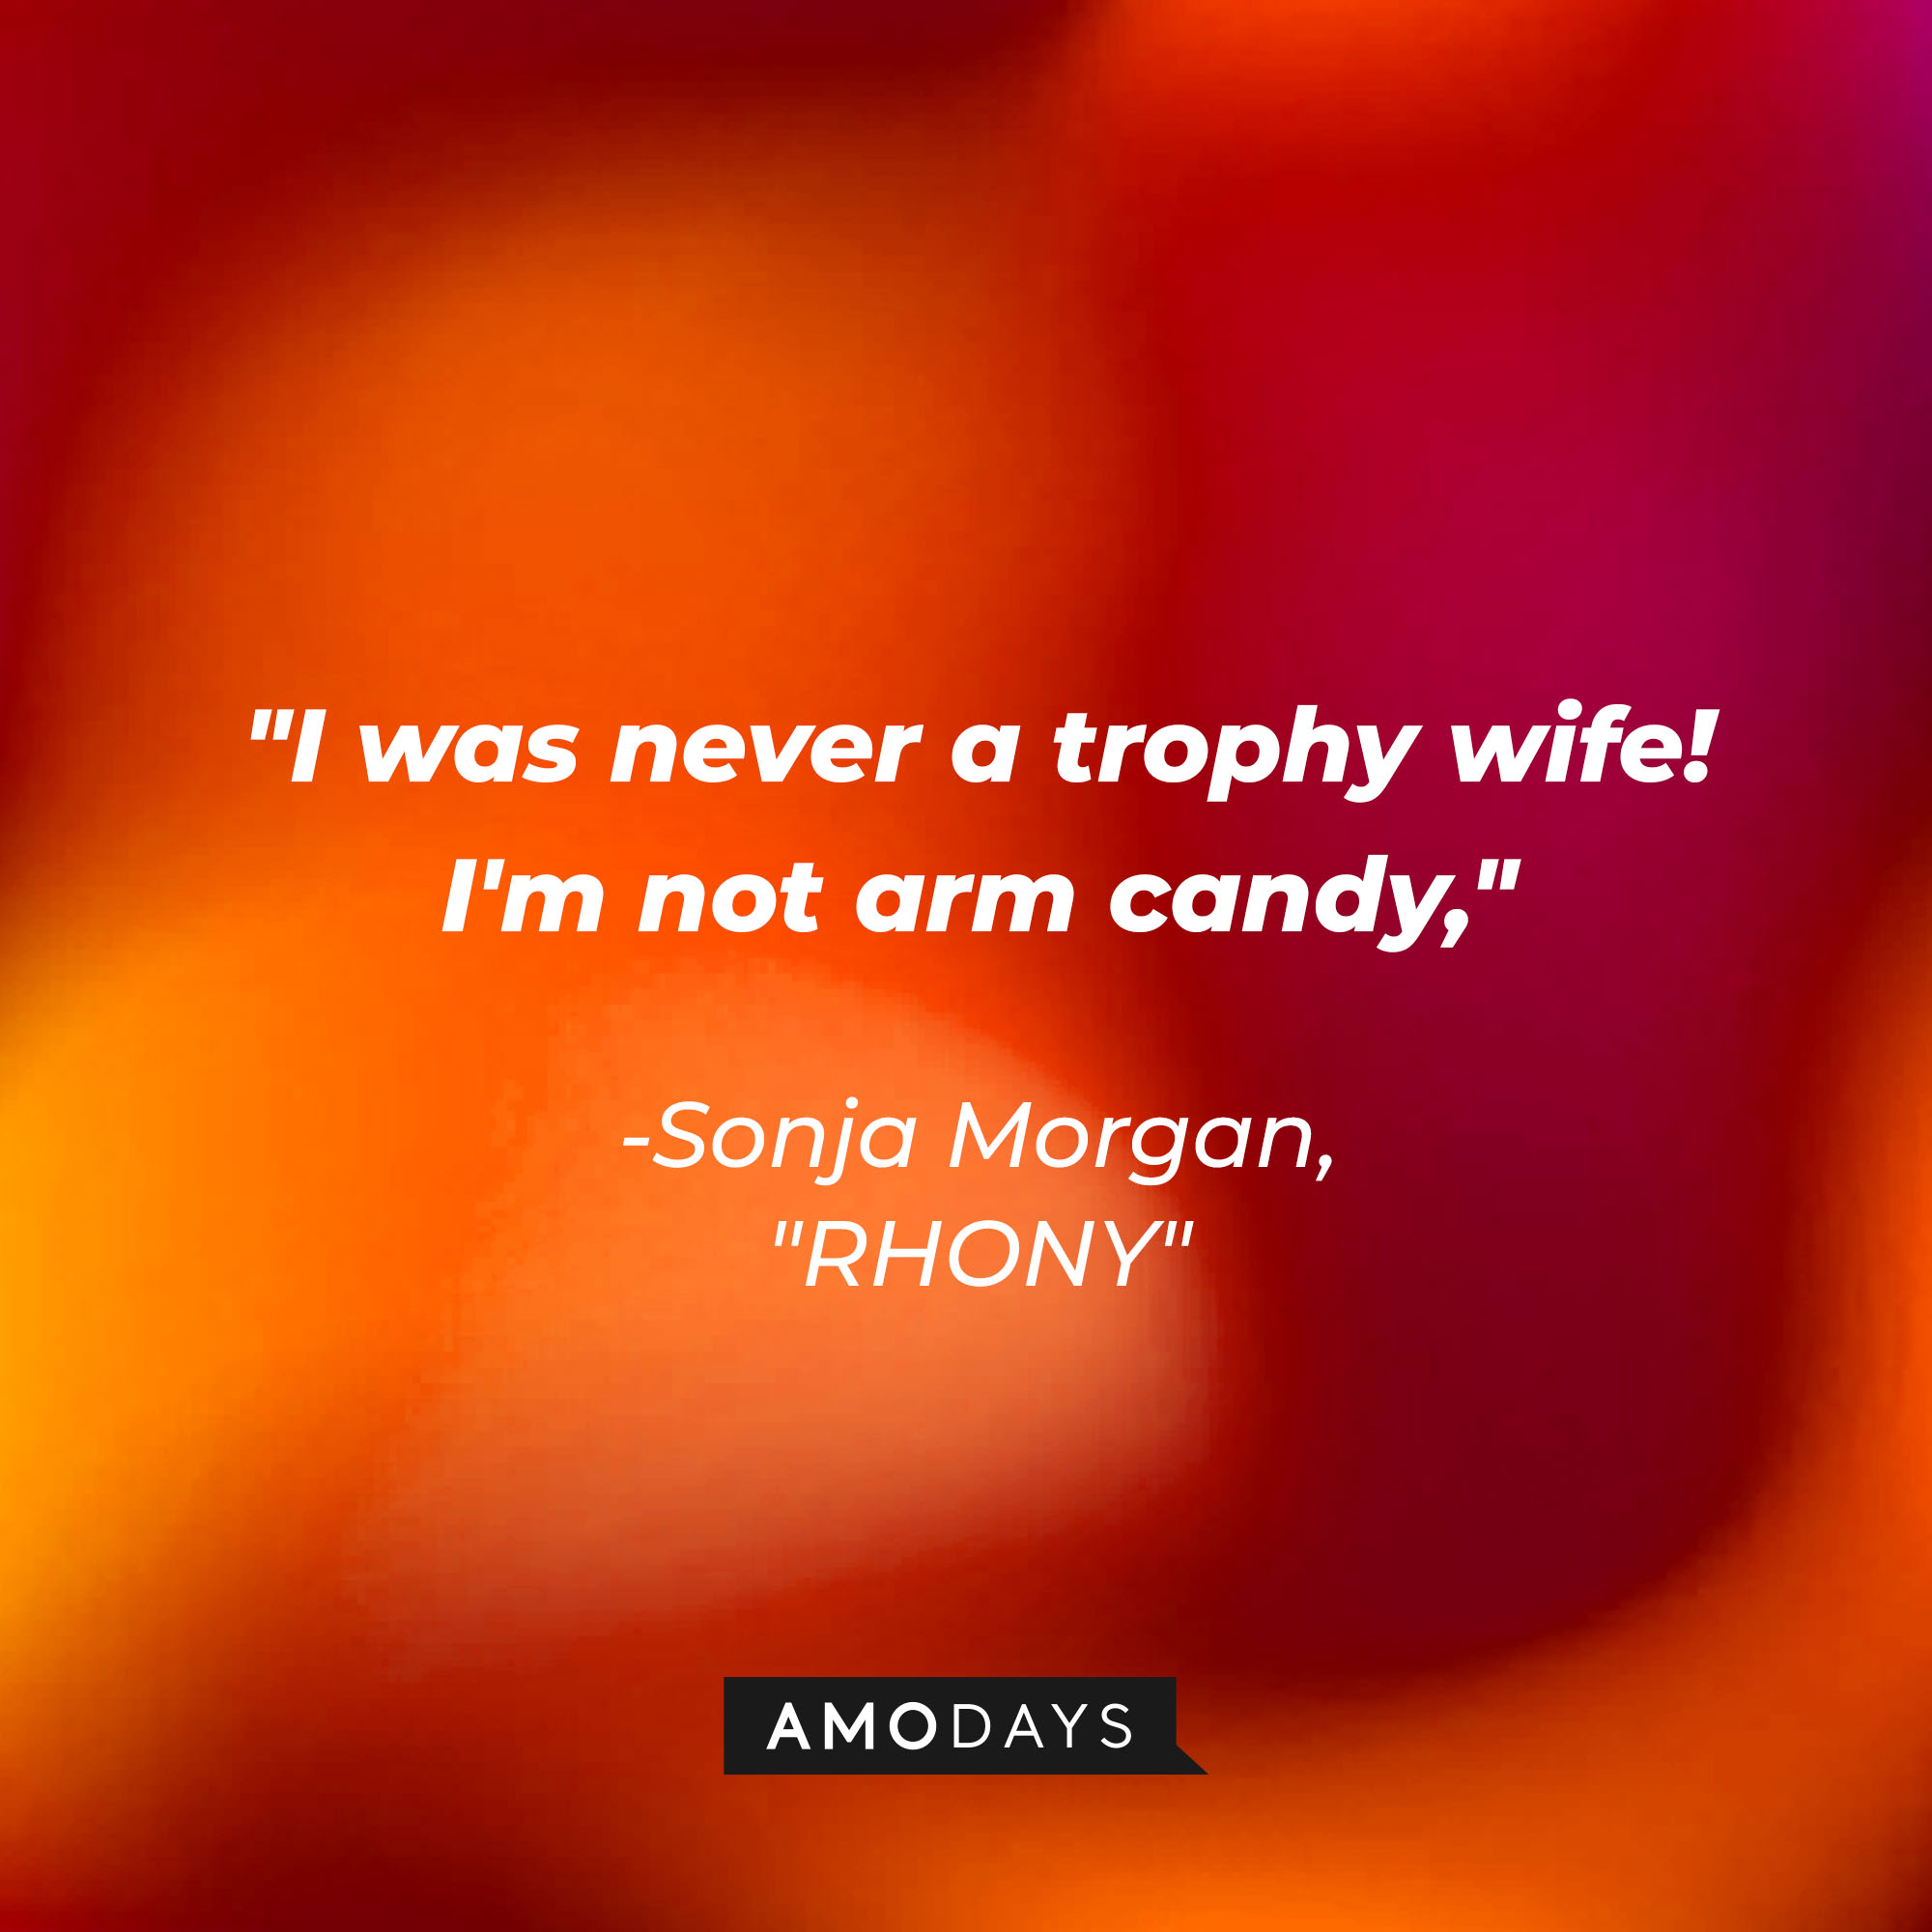 Sonja Morgan's quote: "I was never a trophy wife! I'm not arm candy" | Source: Amodays